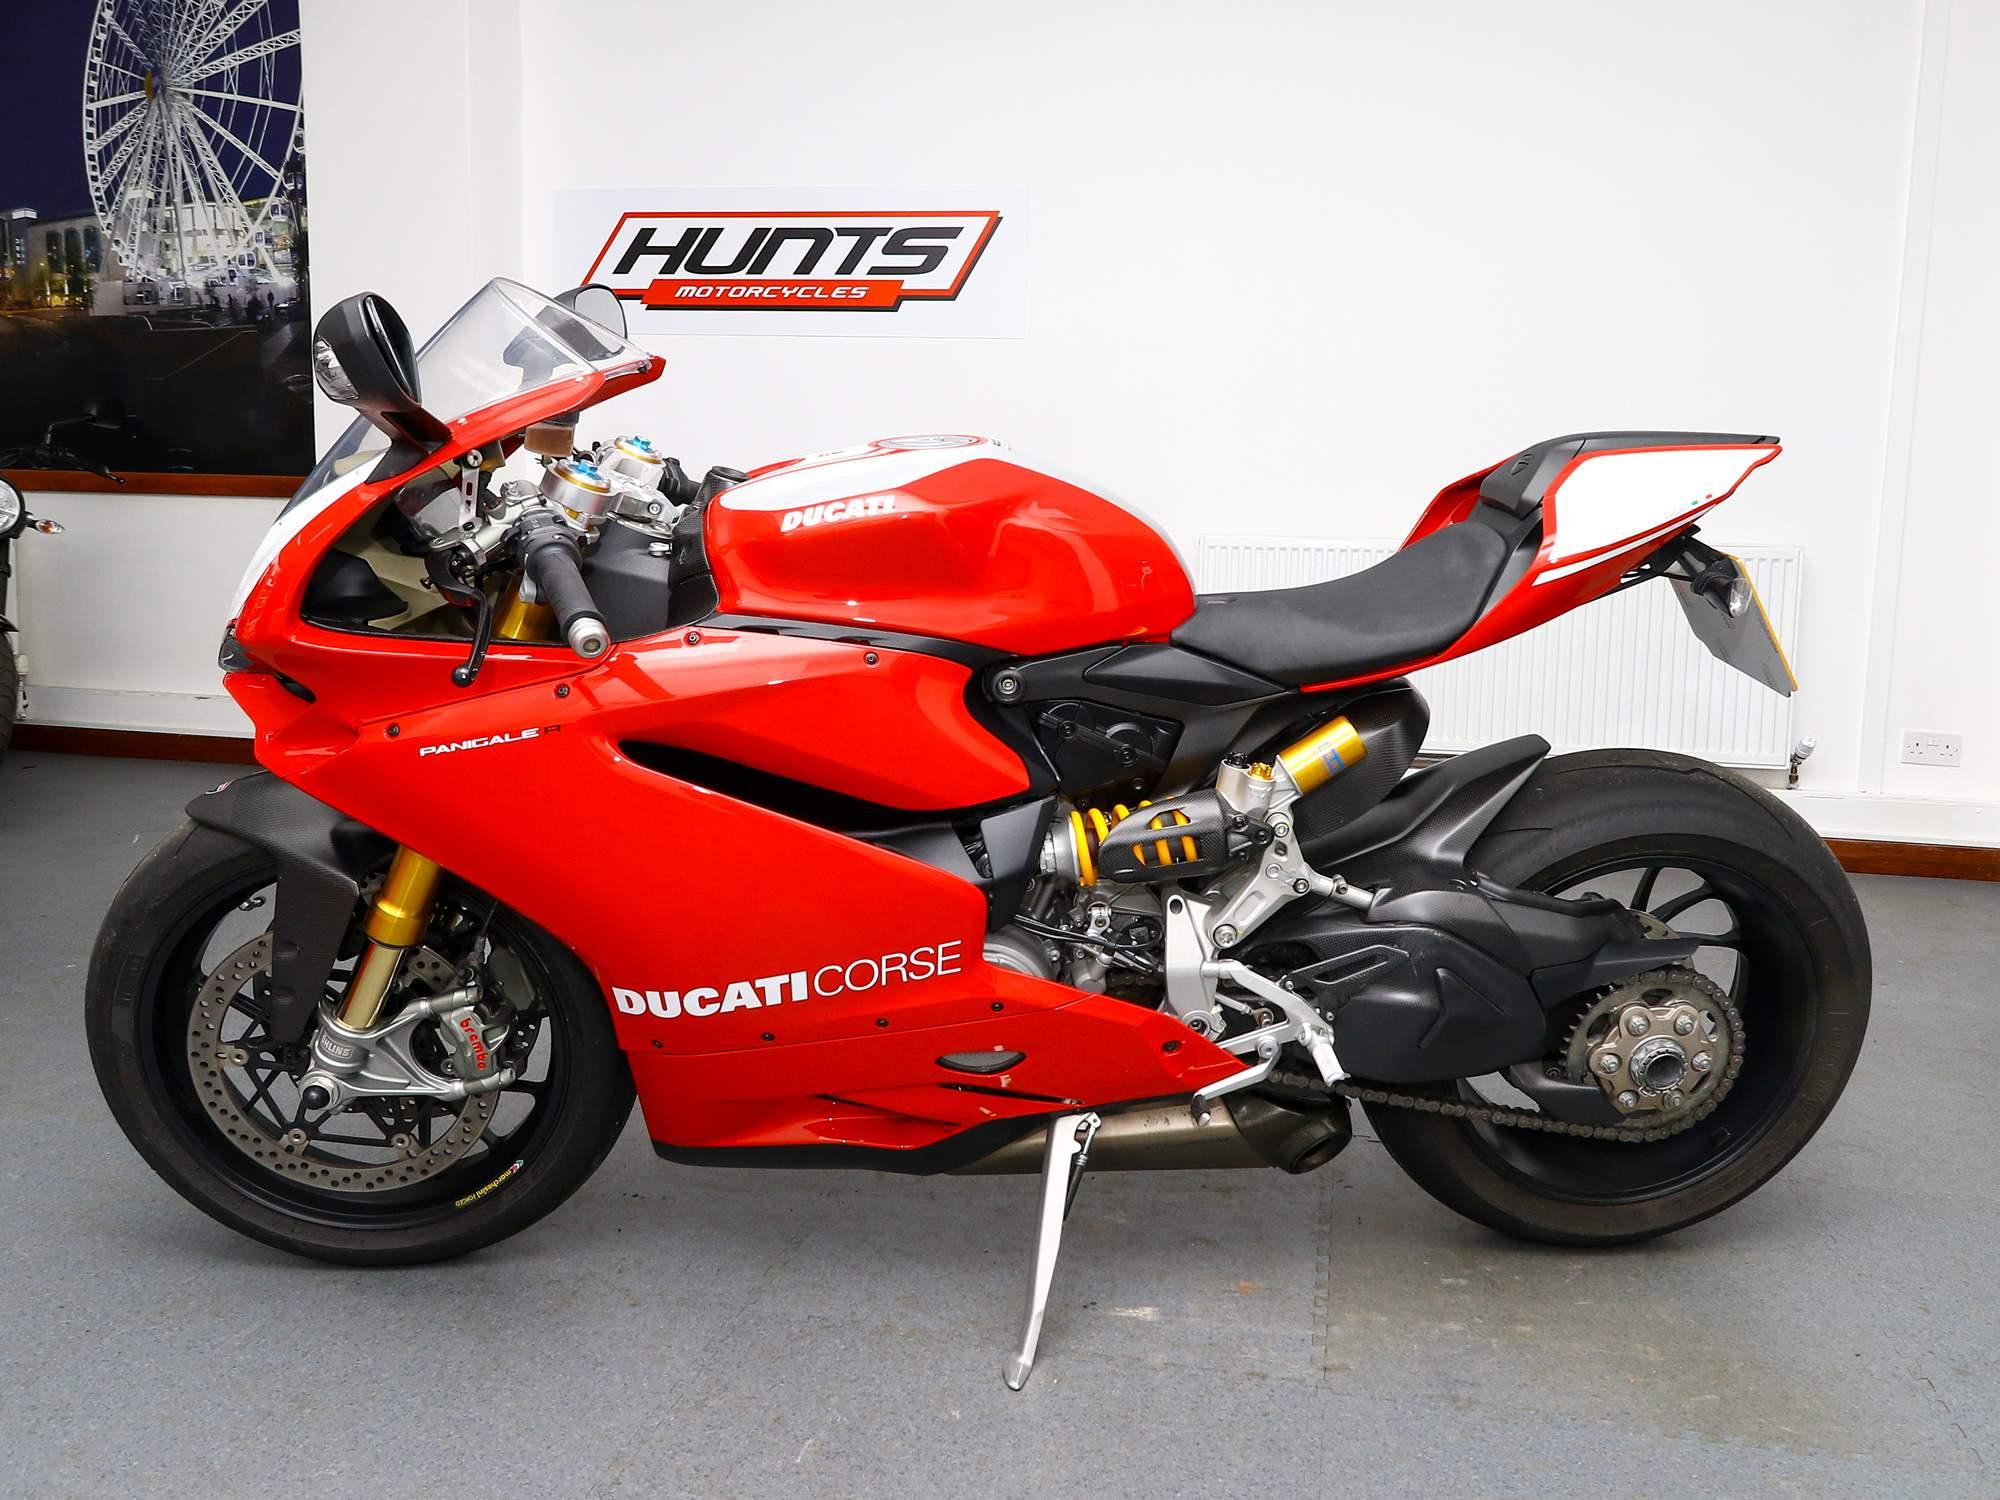 2014 Ducati 1199 Panigale 1199 Panigale R ABS